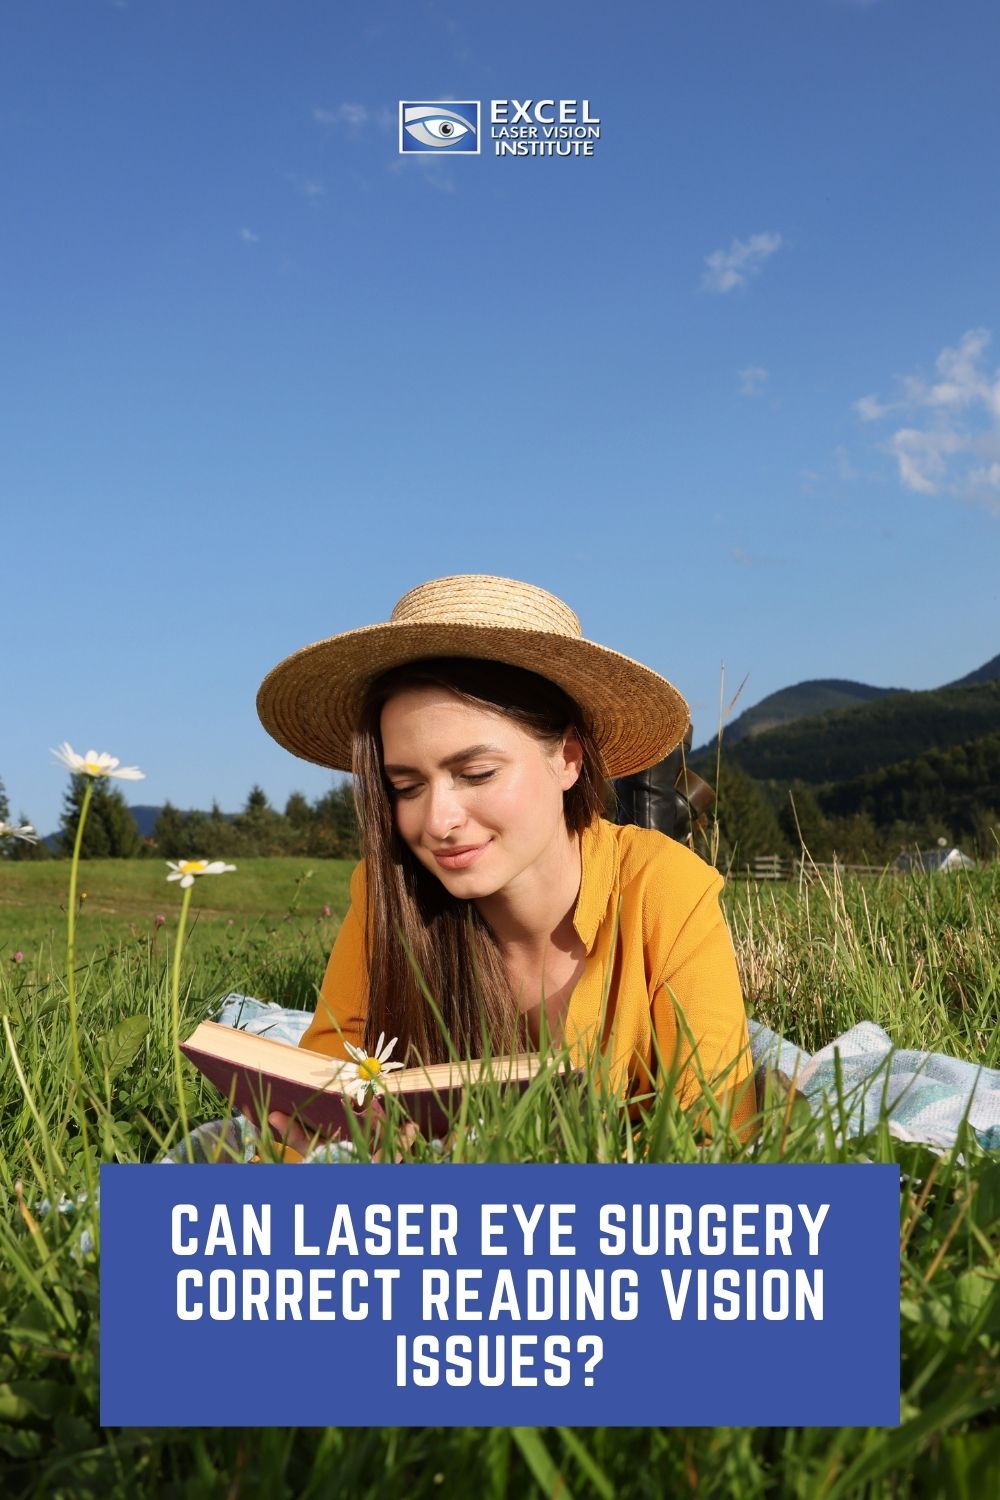 Find out if you can cure reading vision issues with LASIK Orange County laser eye surgery